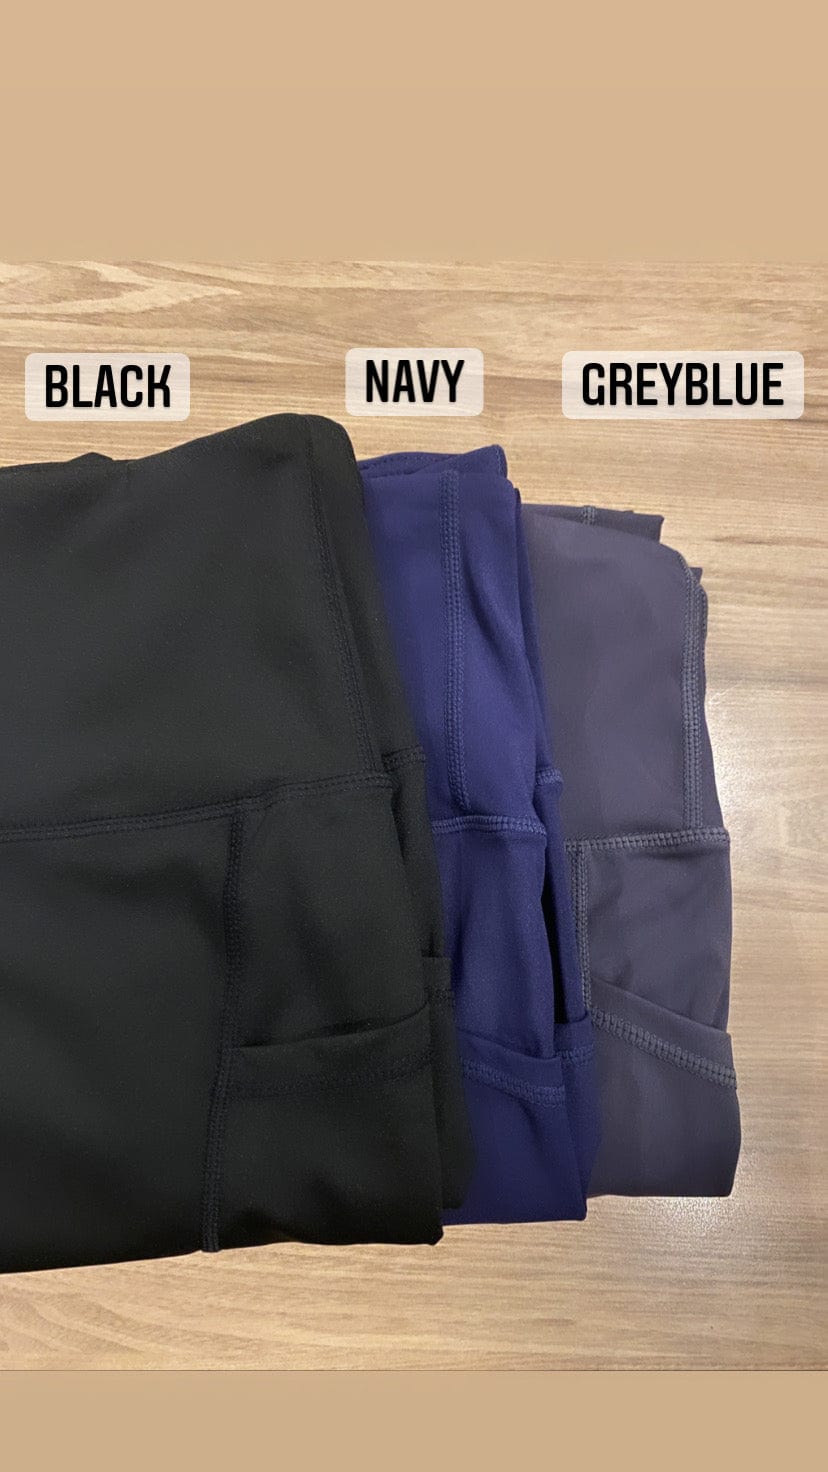 Essential 5.0 (Curves series too) seamless leggings (longer version of Everyday seamless shorts with pockets)27.5 inch inseam